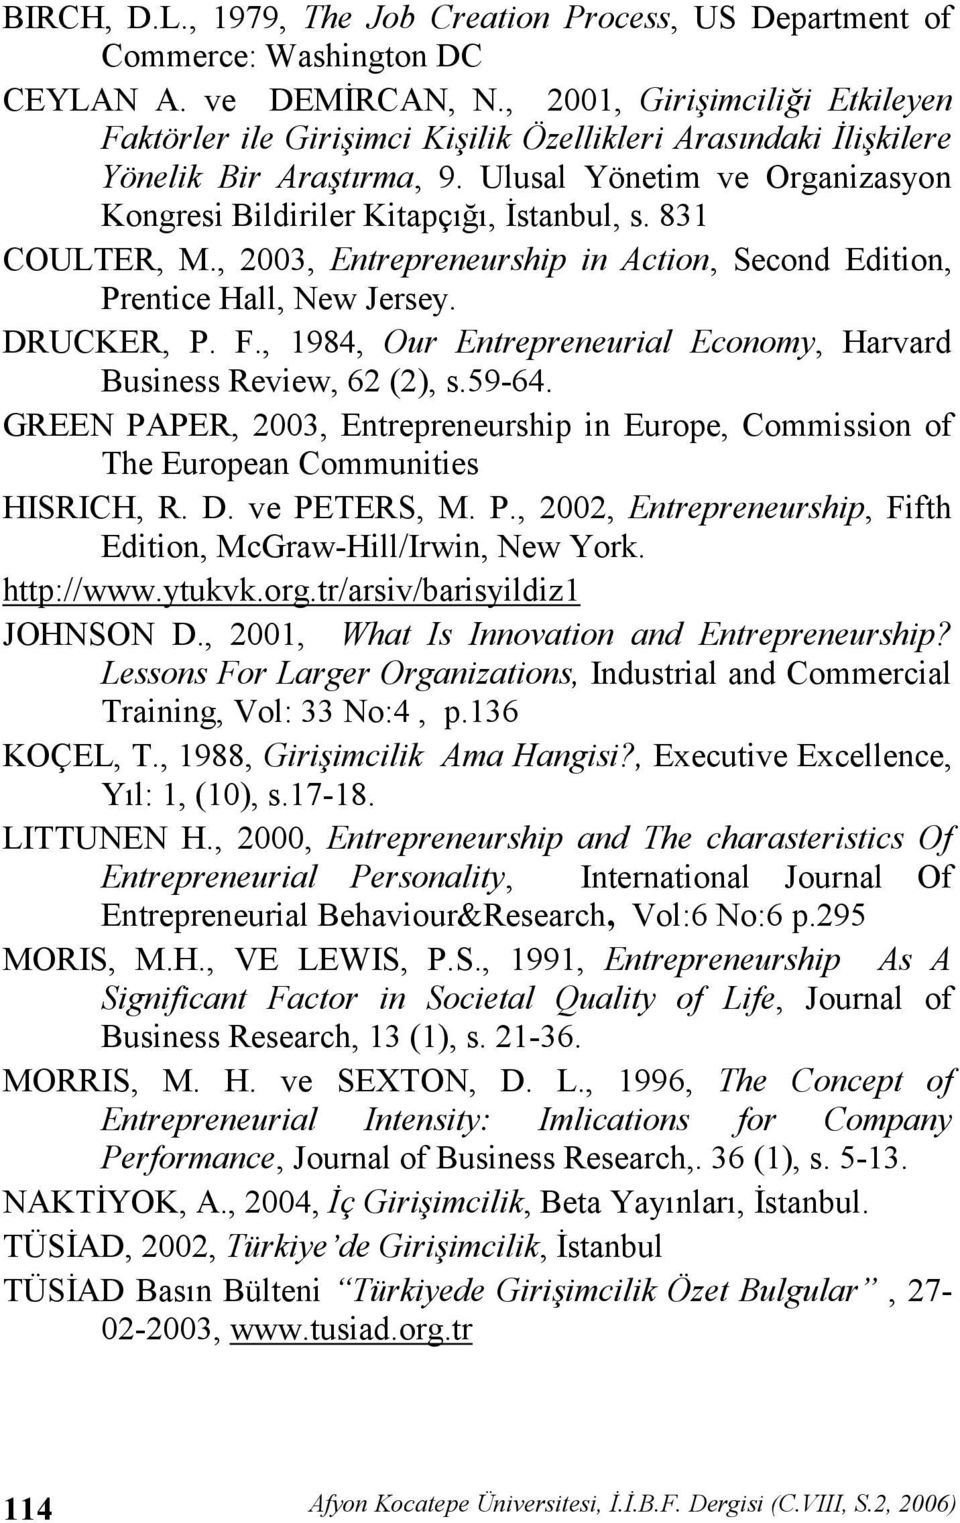 831 COULTER, M., 2003, Entrepreneurship in Action, Second Edition, Prentice Hall, New Jersey. DRUCKER, P. F., 1984, Our Entrepreneurial Economy, Harvard Business Review, 62 (2), s.59-64.